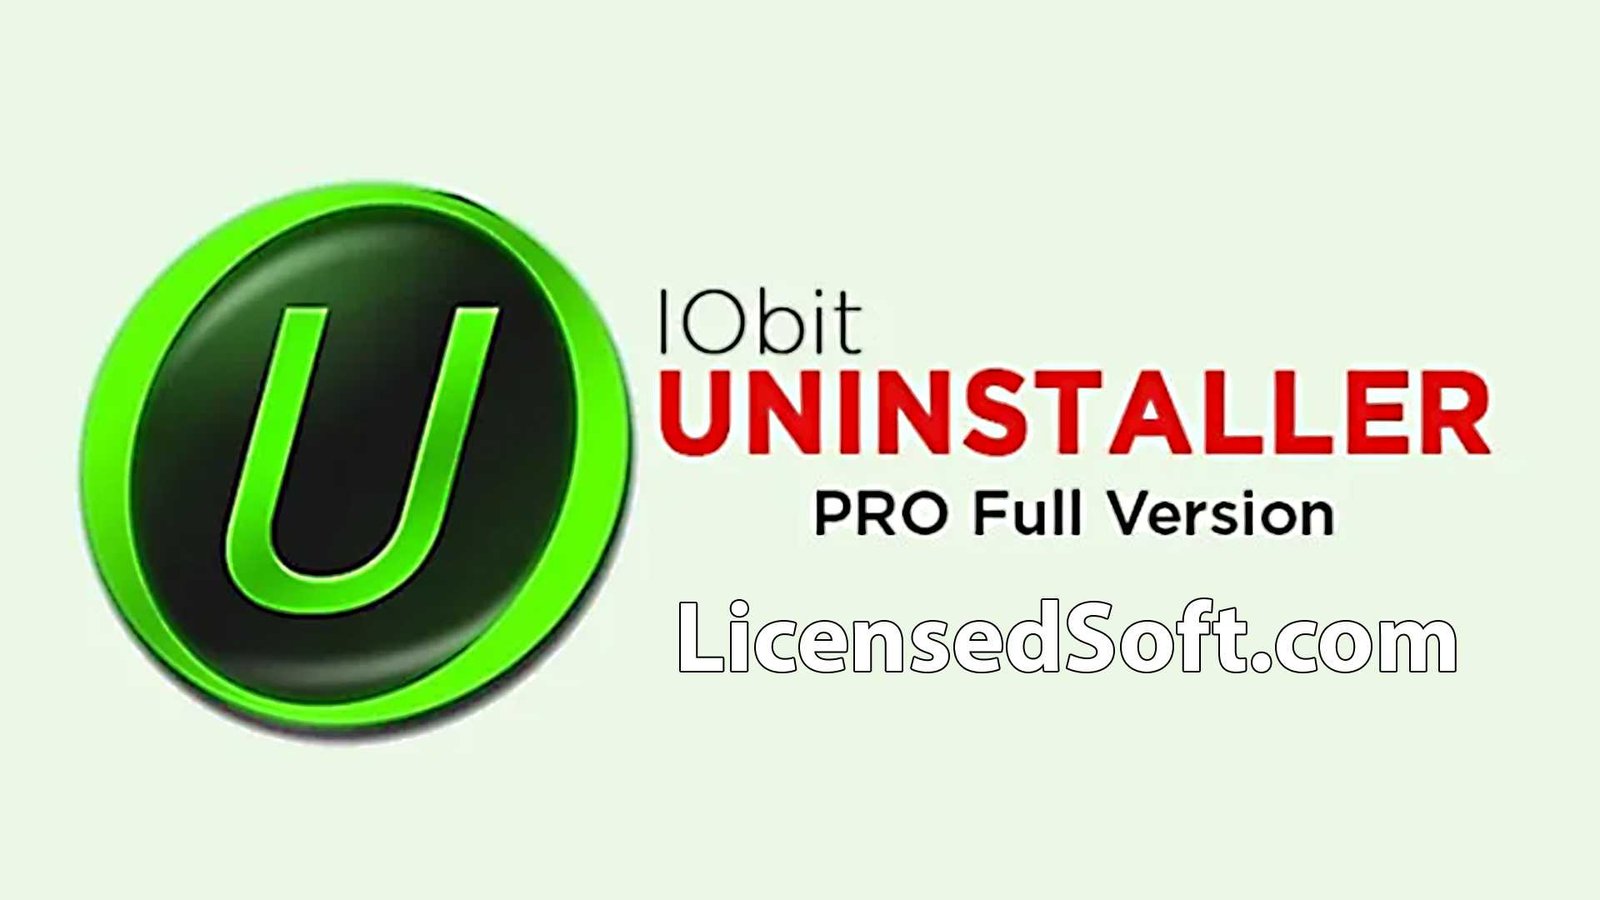 IObit Uninstaller Pro 13.0.0.13 Full Version Cover Image By LicensedSoft